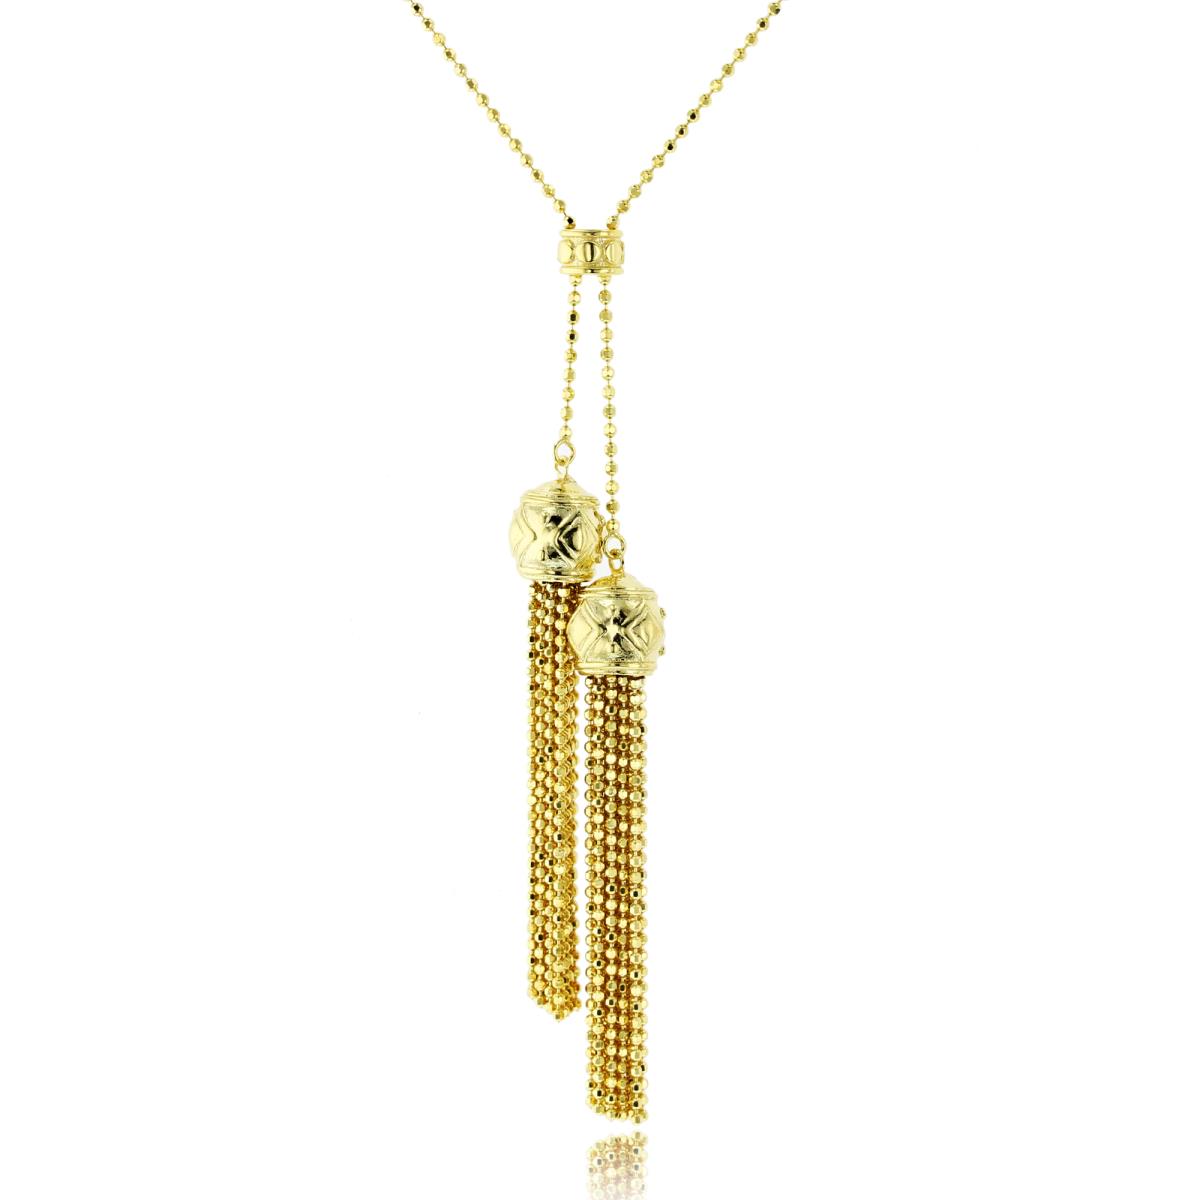 14K Yellow Gold Double Tassels 18" Beaded Necklace